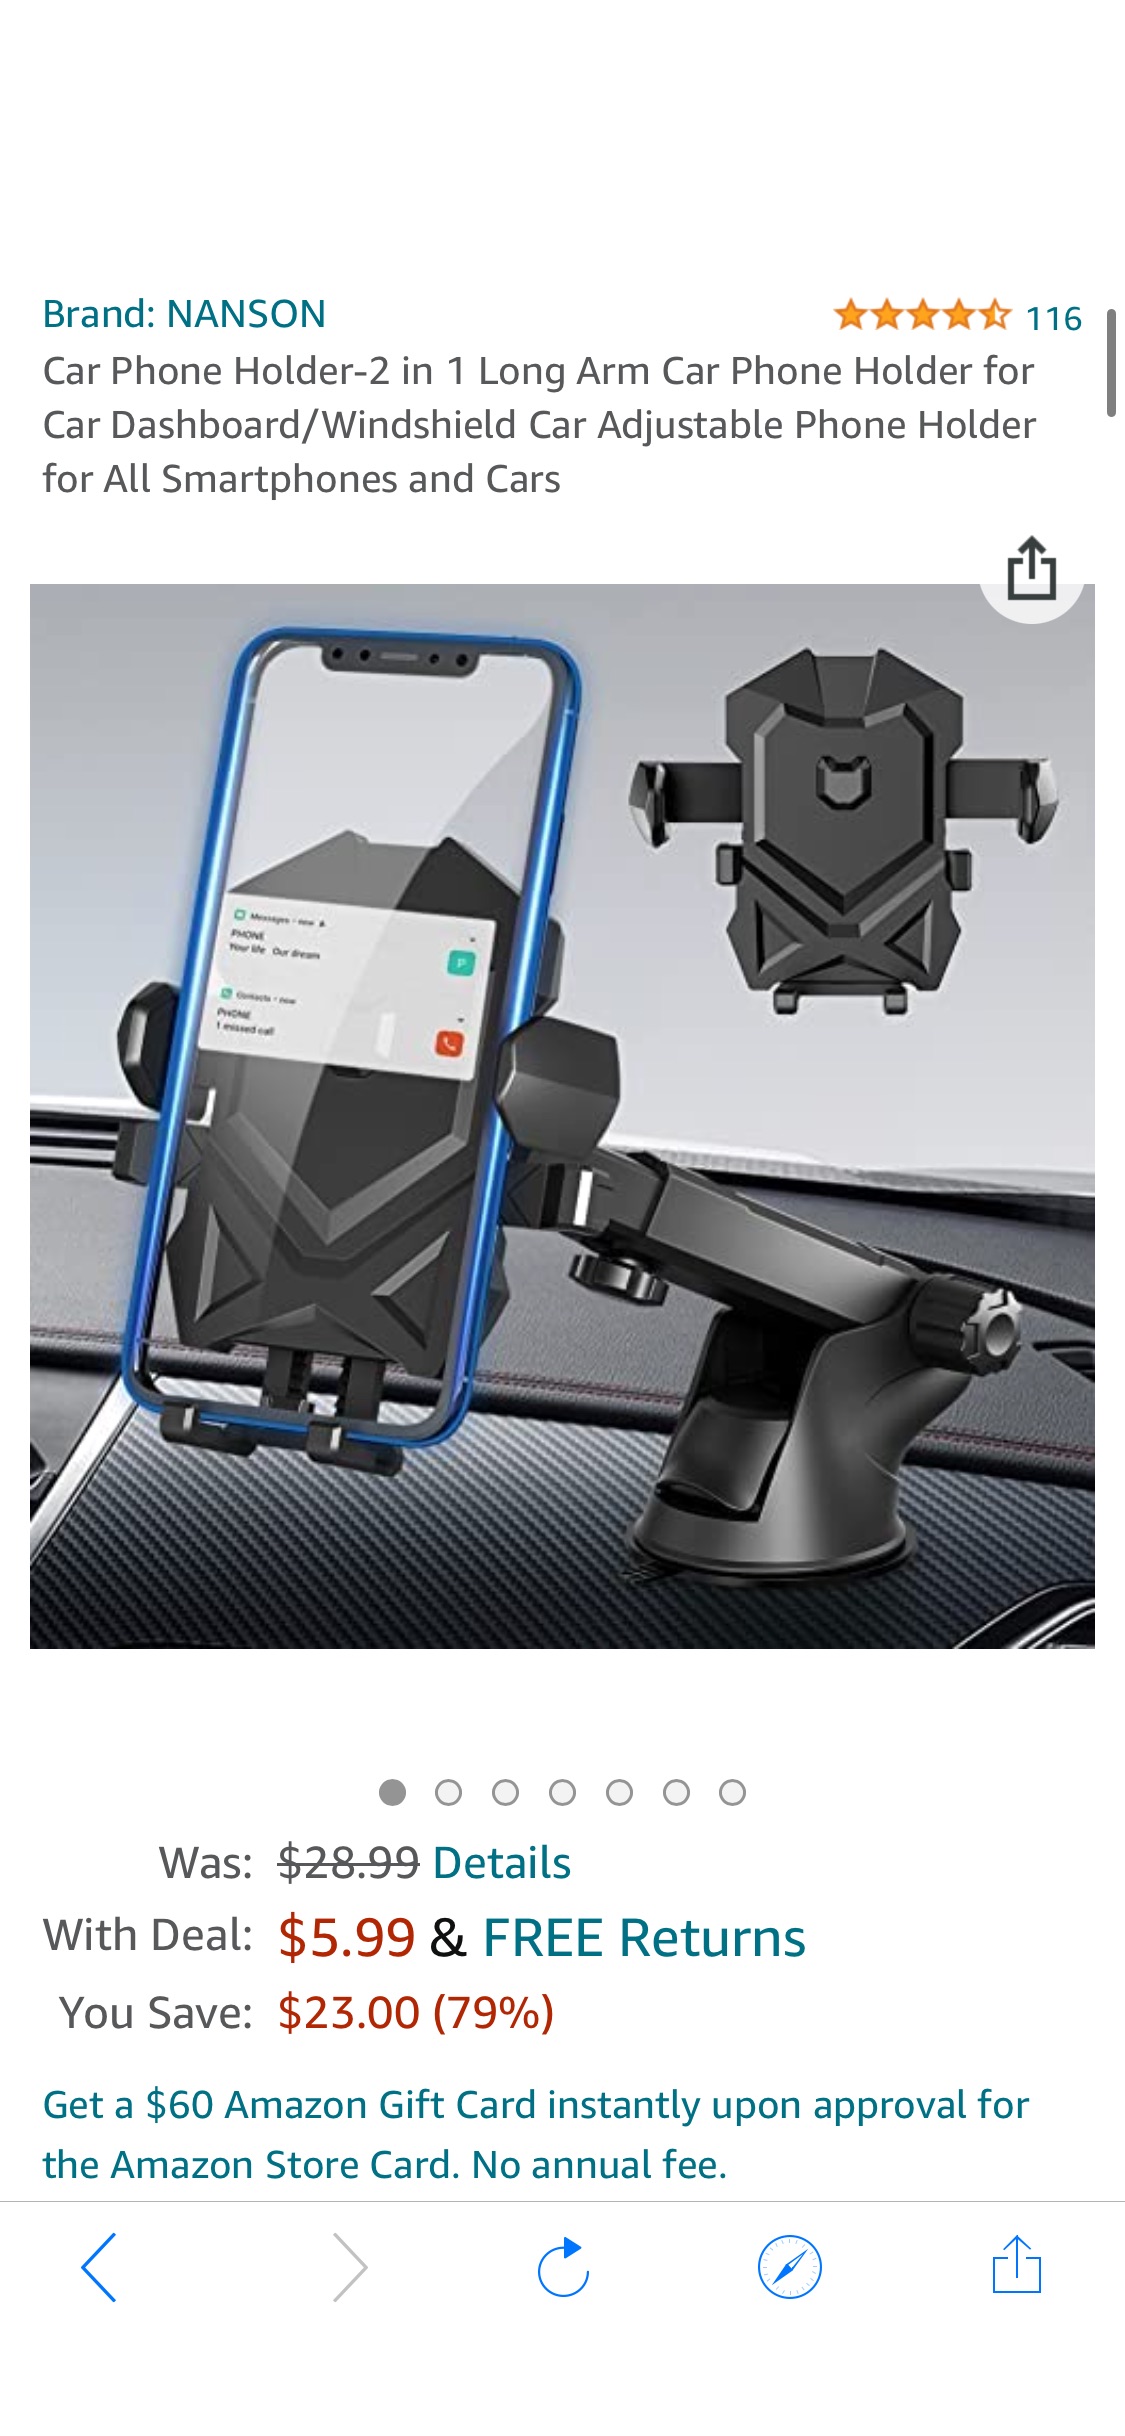 Amazon.com: Car Phone Holder-2 in 1 Long Arm Car Phone Holder for Car Dashboard/Windshield Car Adjustable Phone Holder for All Smartphones and Cars : 车载手机支架